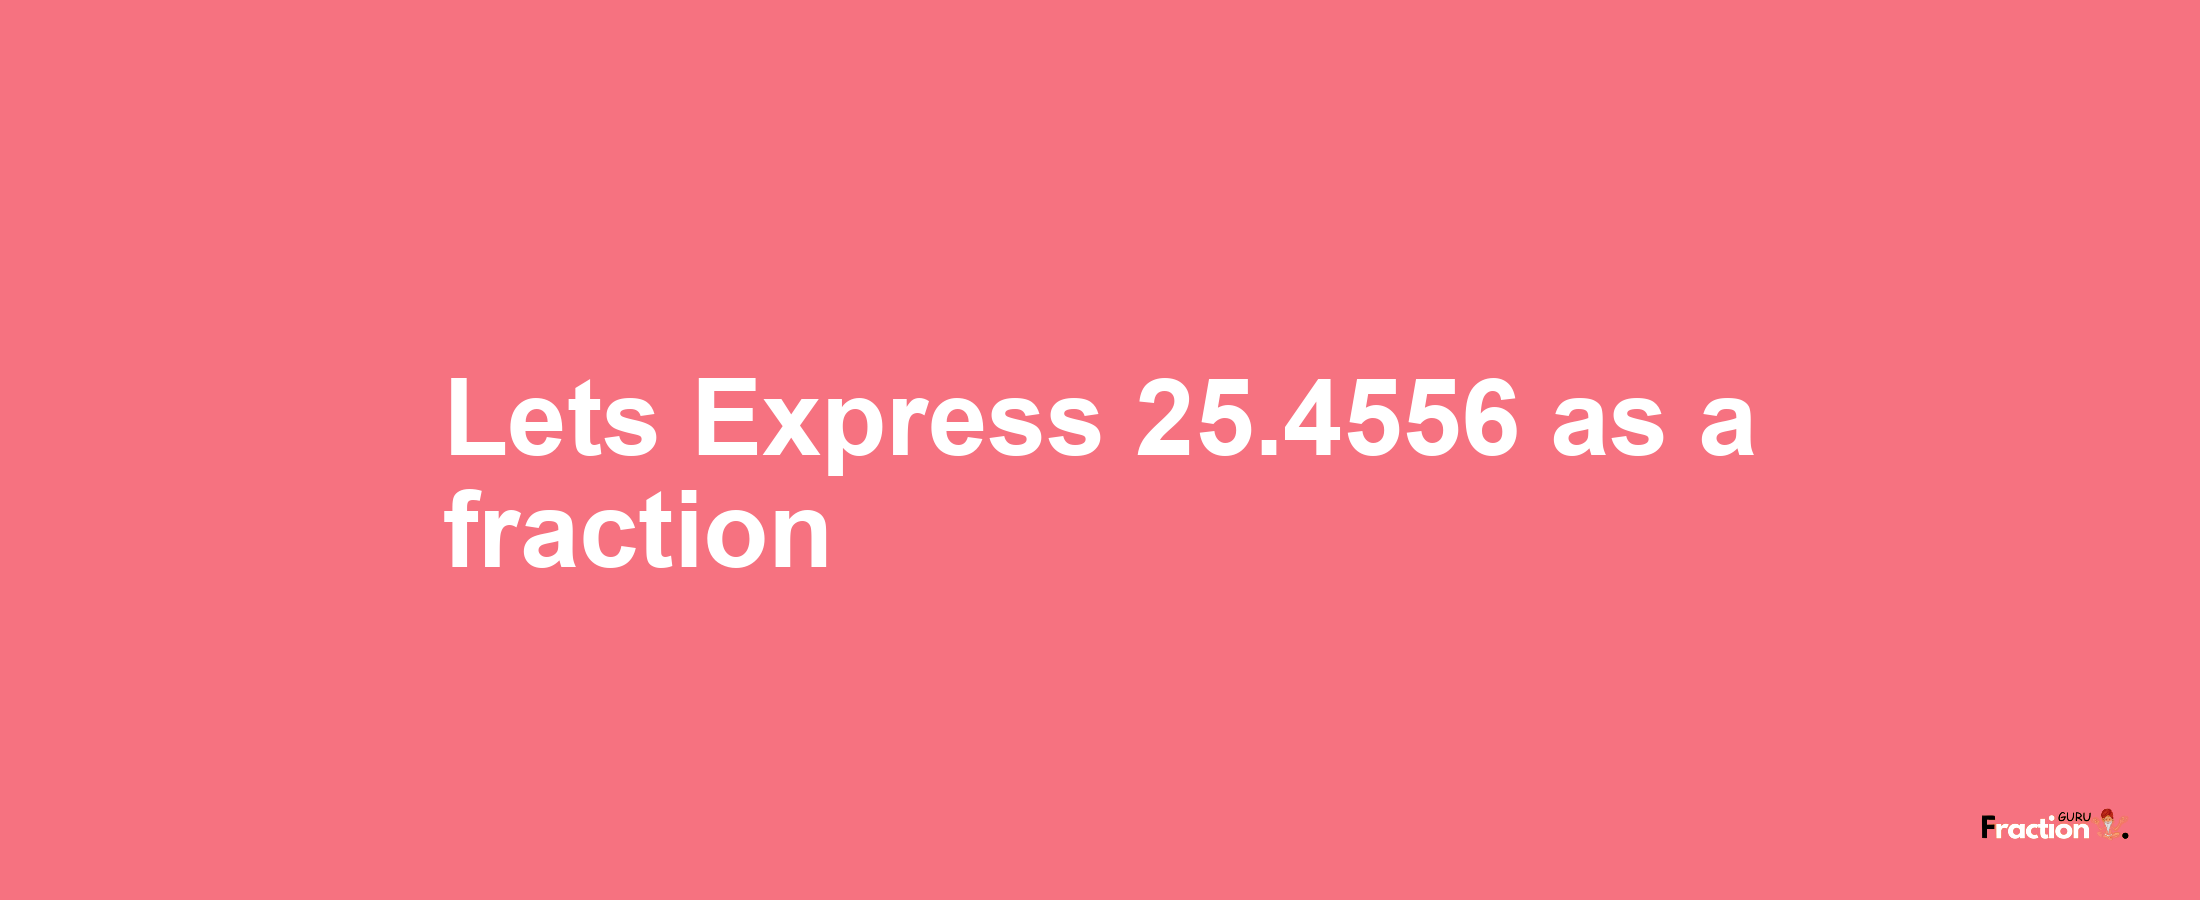 Lets Express 25.4556 as afraction